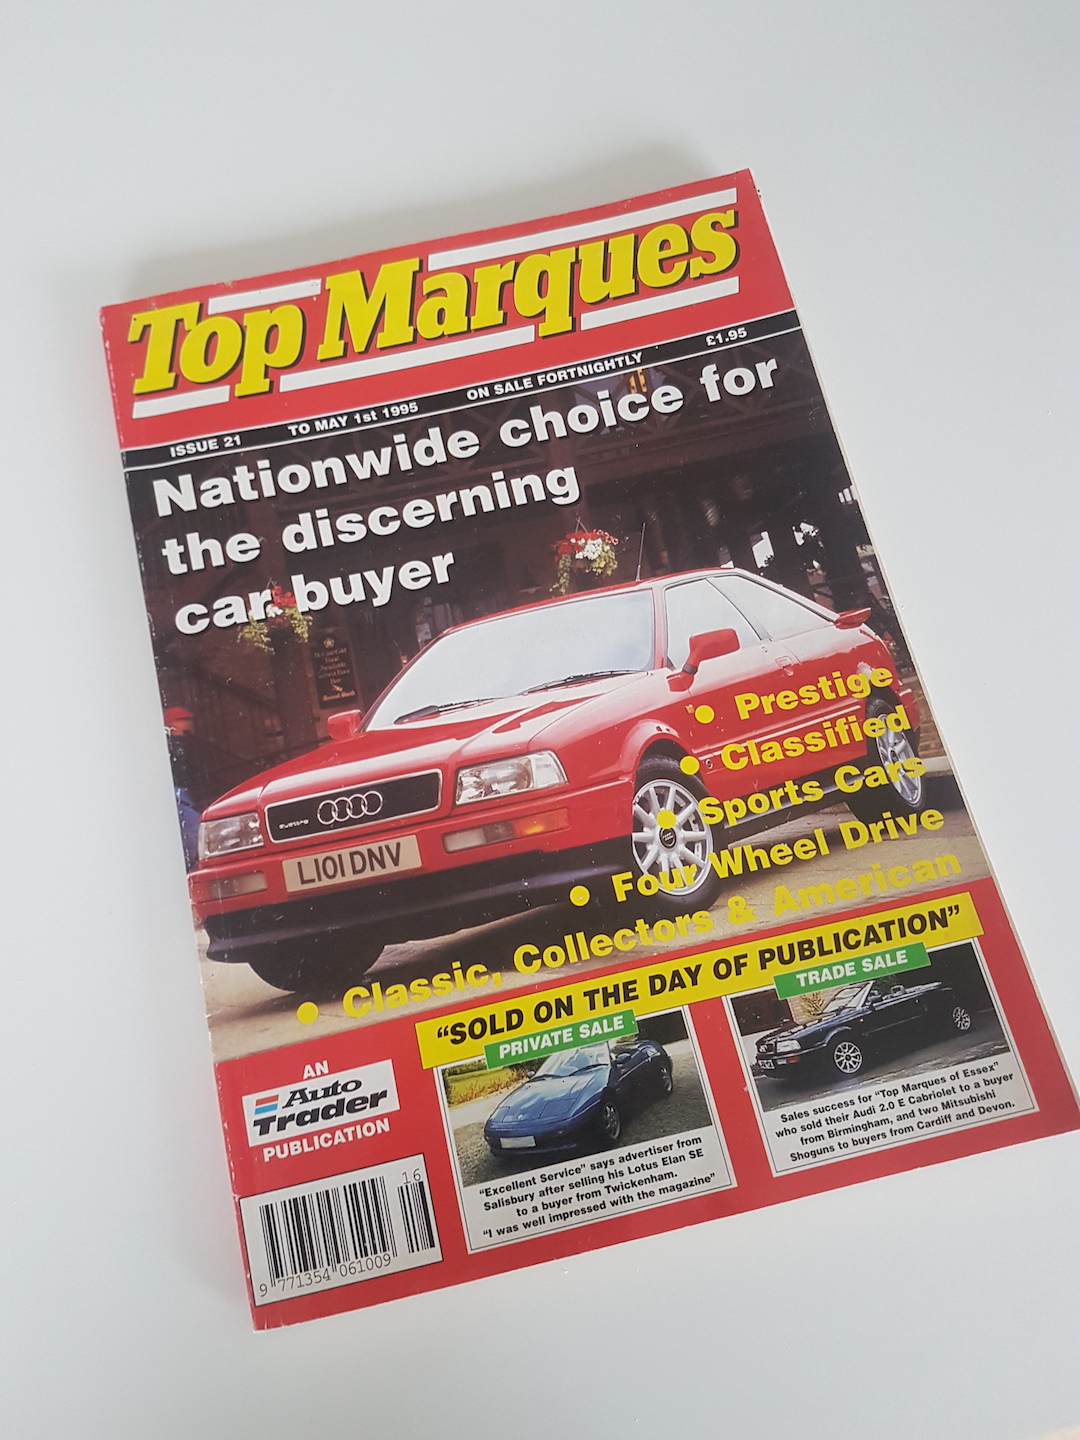 Top Marques May 95 cover